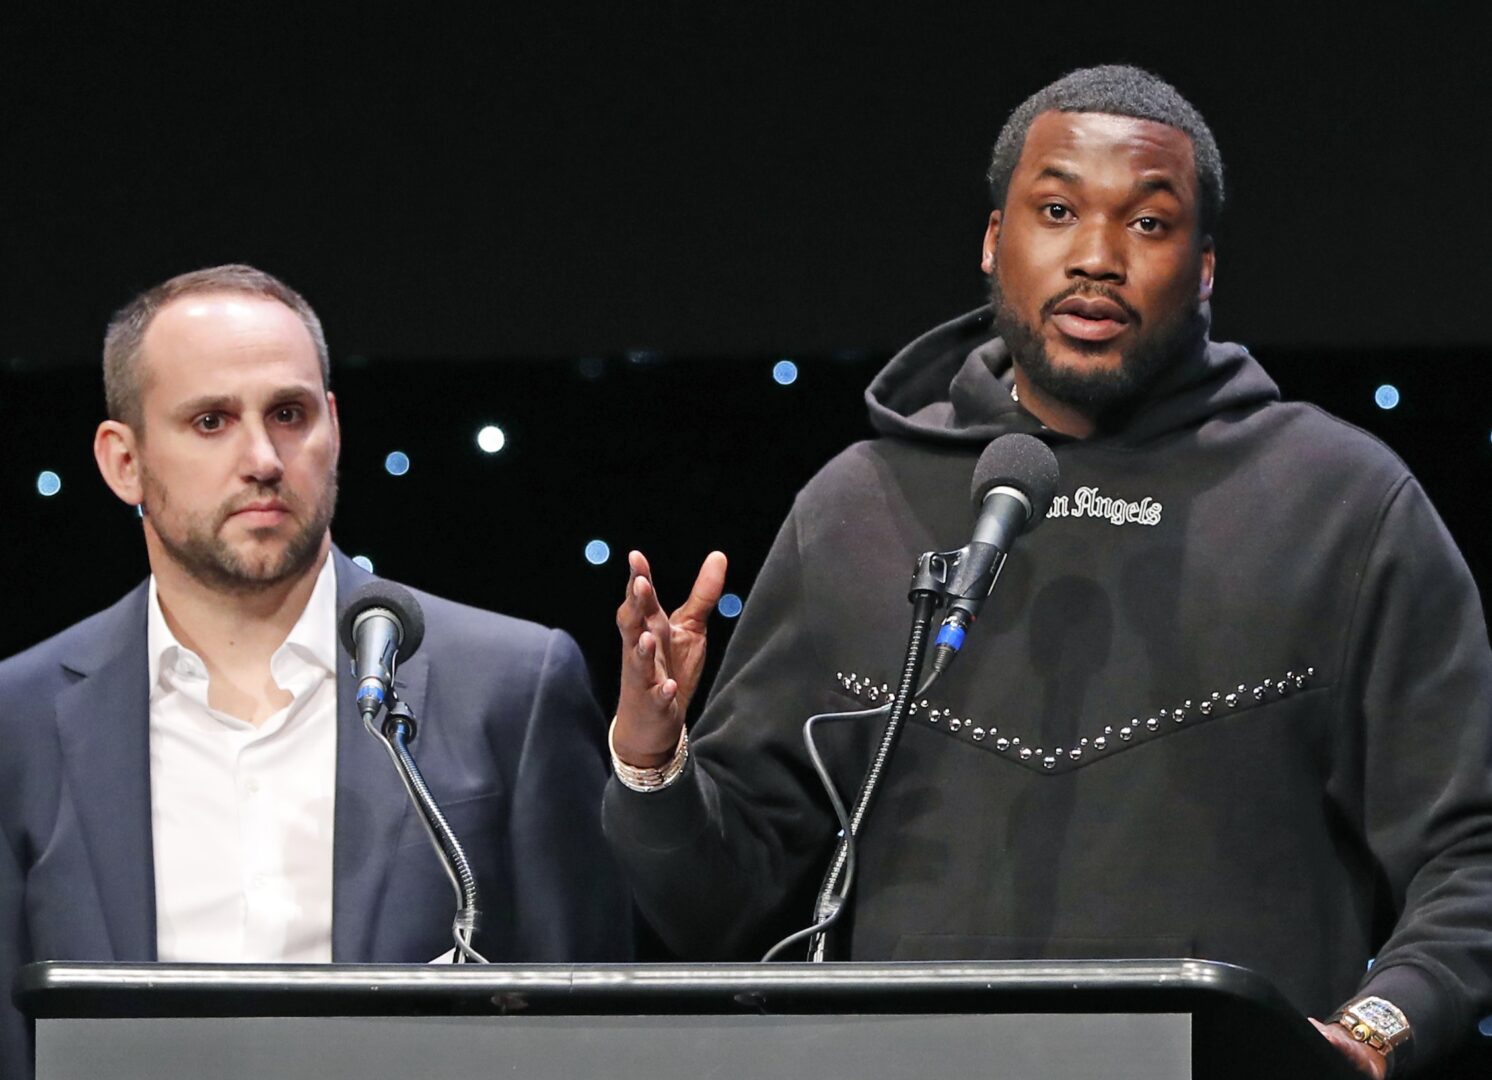 Meek Mill says he hopes 'riots stop' as looting and unrest rage citywide in  Philadelphia